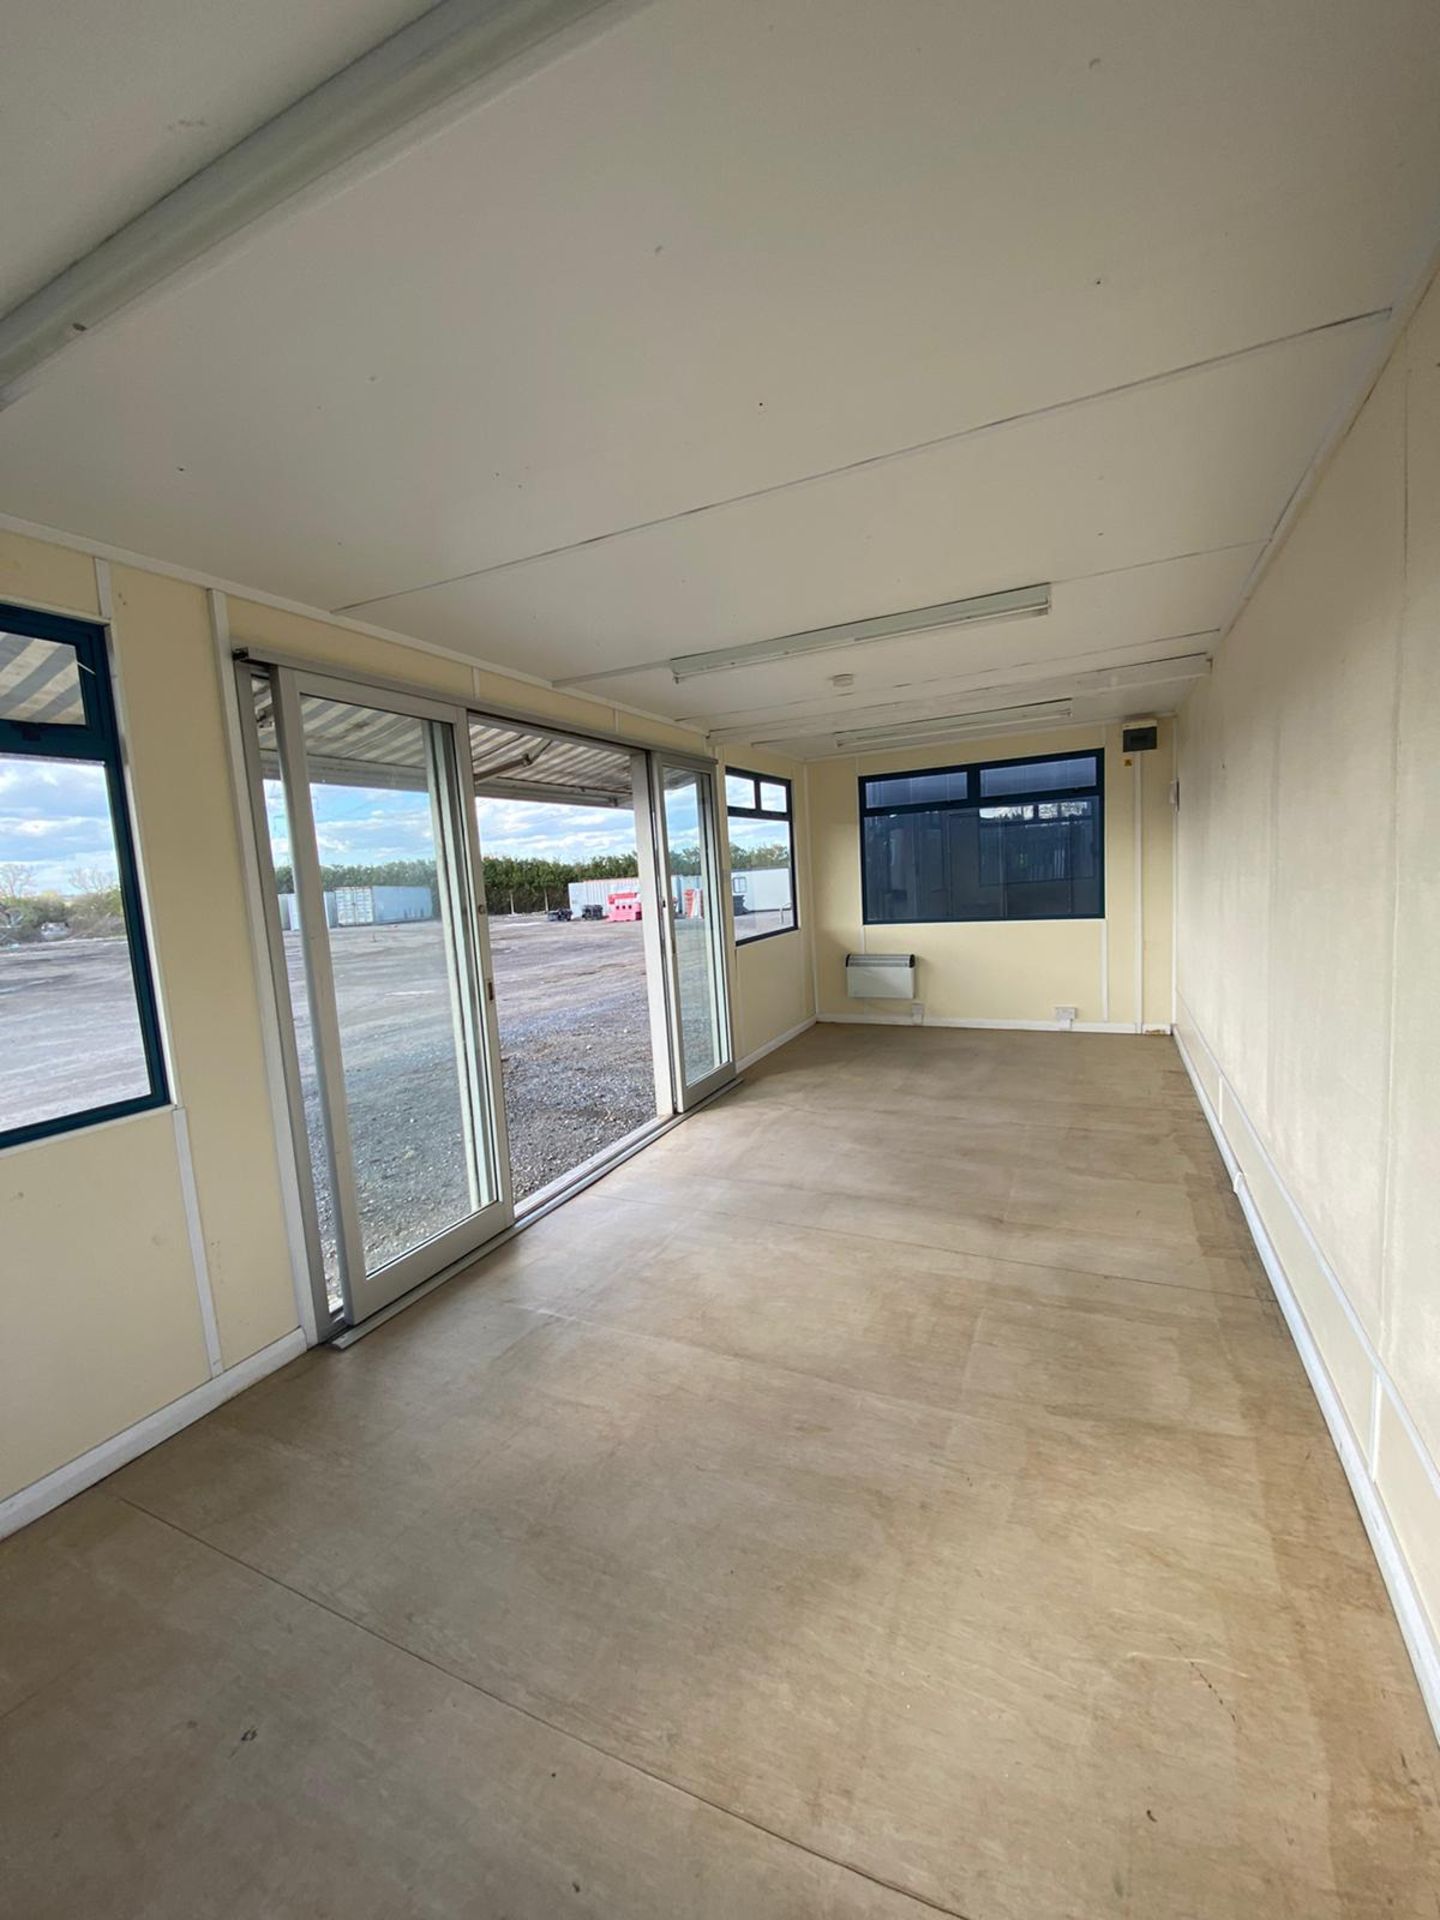 24ft marketing Suite - Image 12 of 15